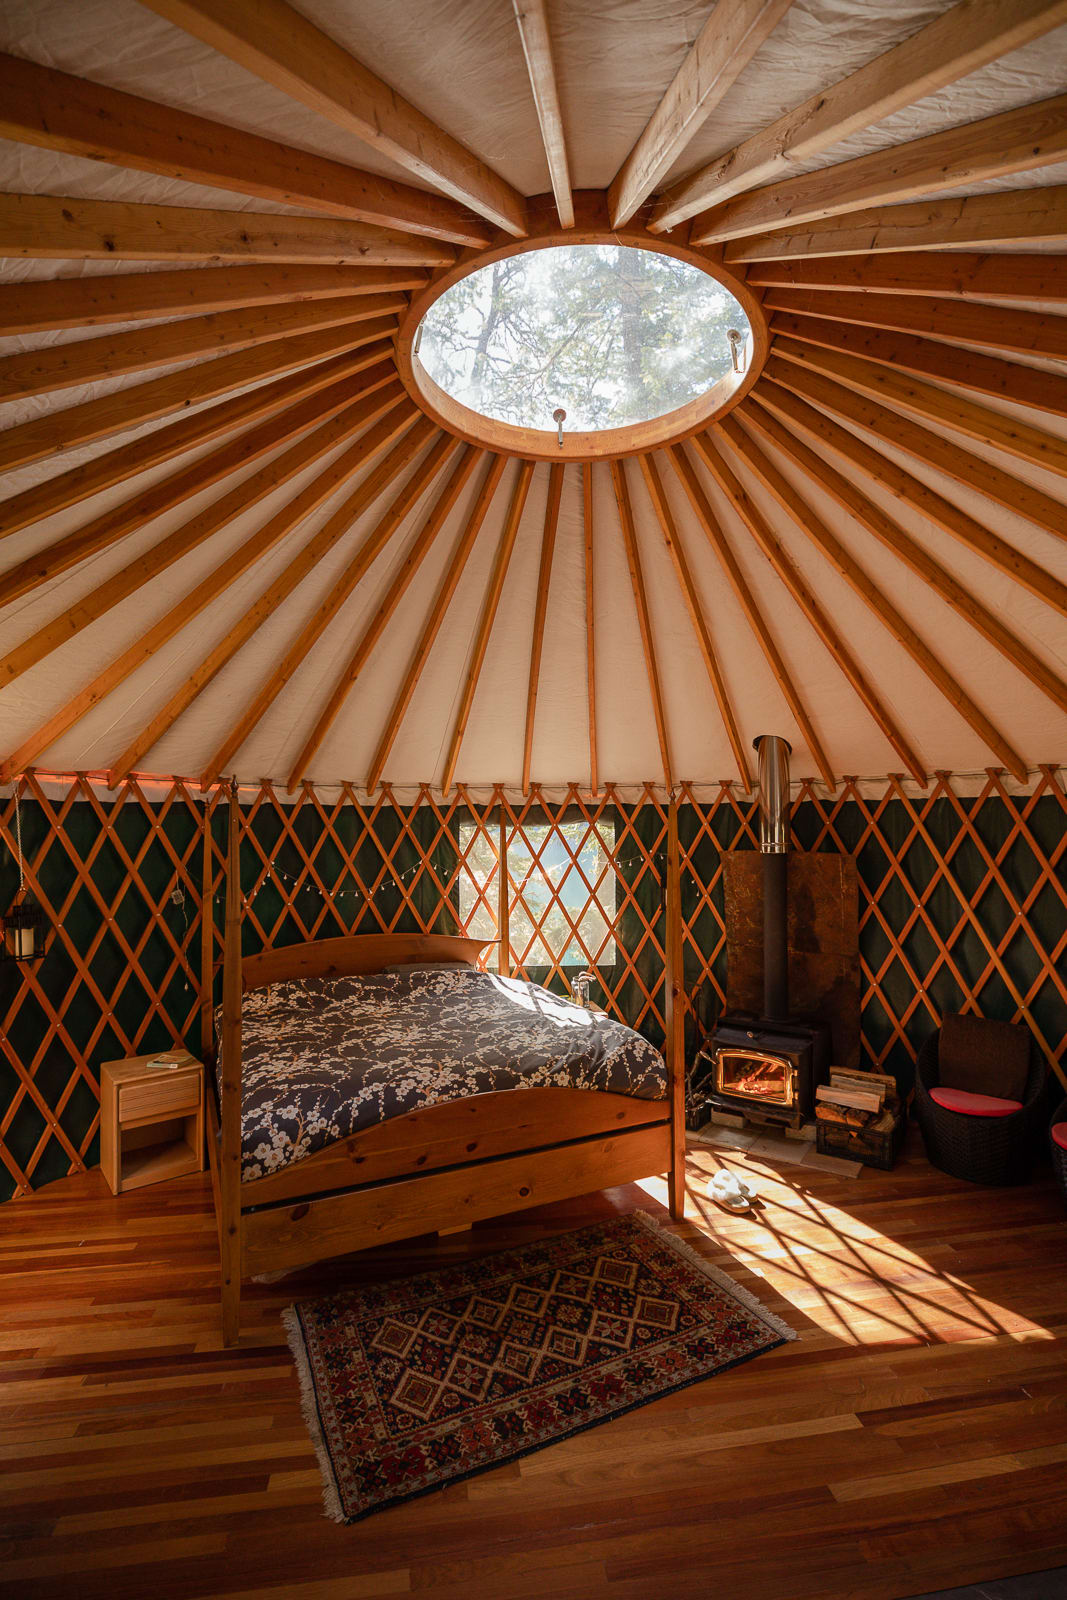 The Yurt has a skylight so you can gaze at the stars   from your bed at night or daydream through the trees during the day.